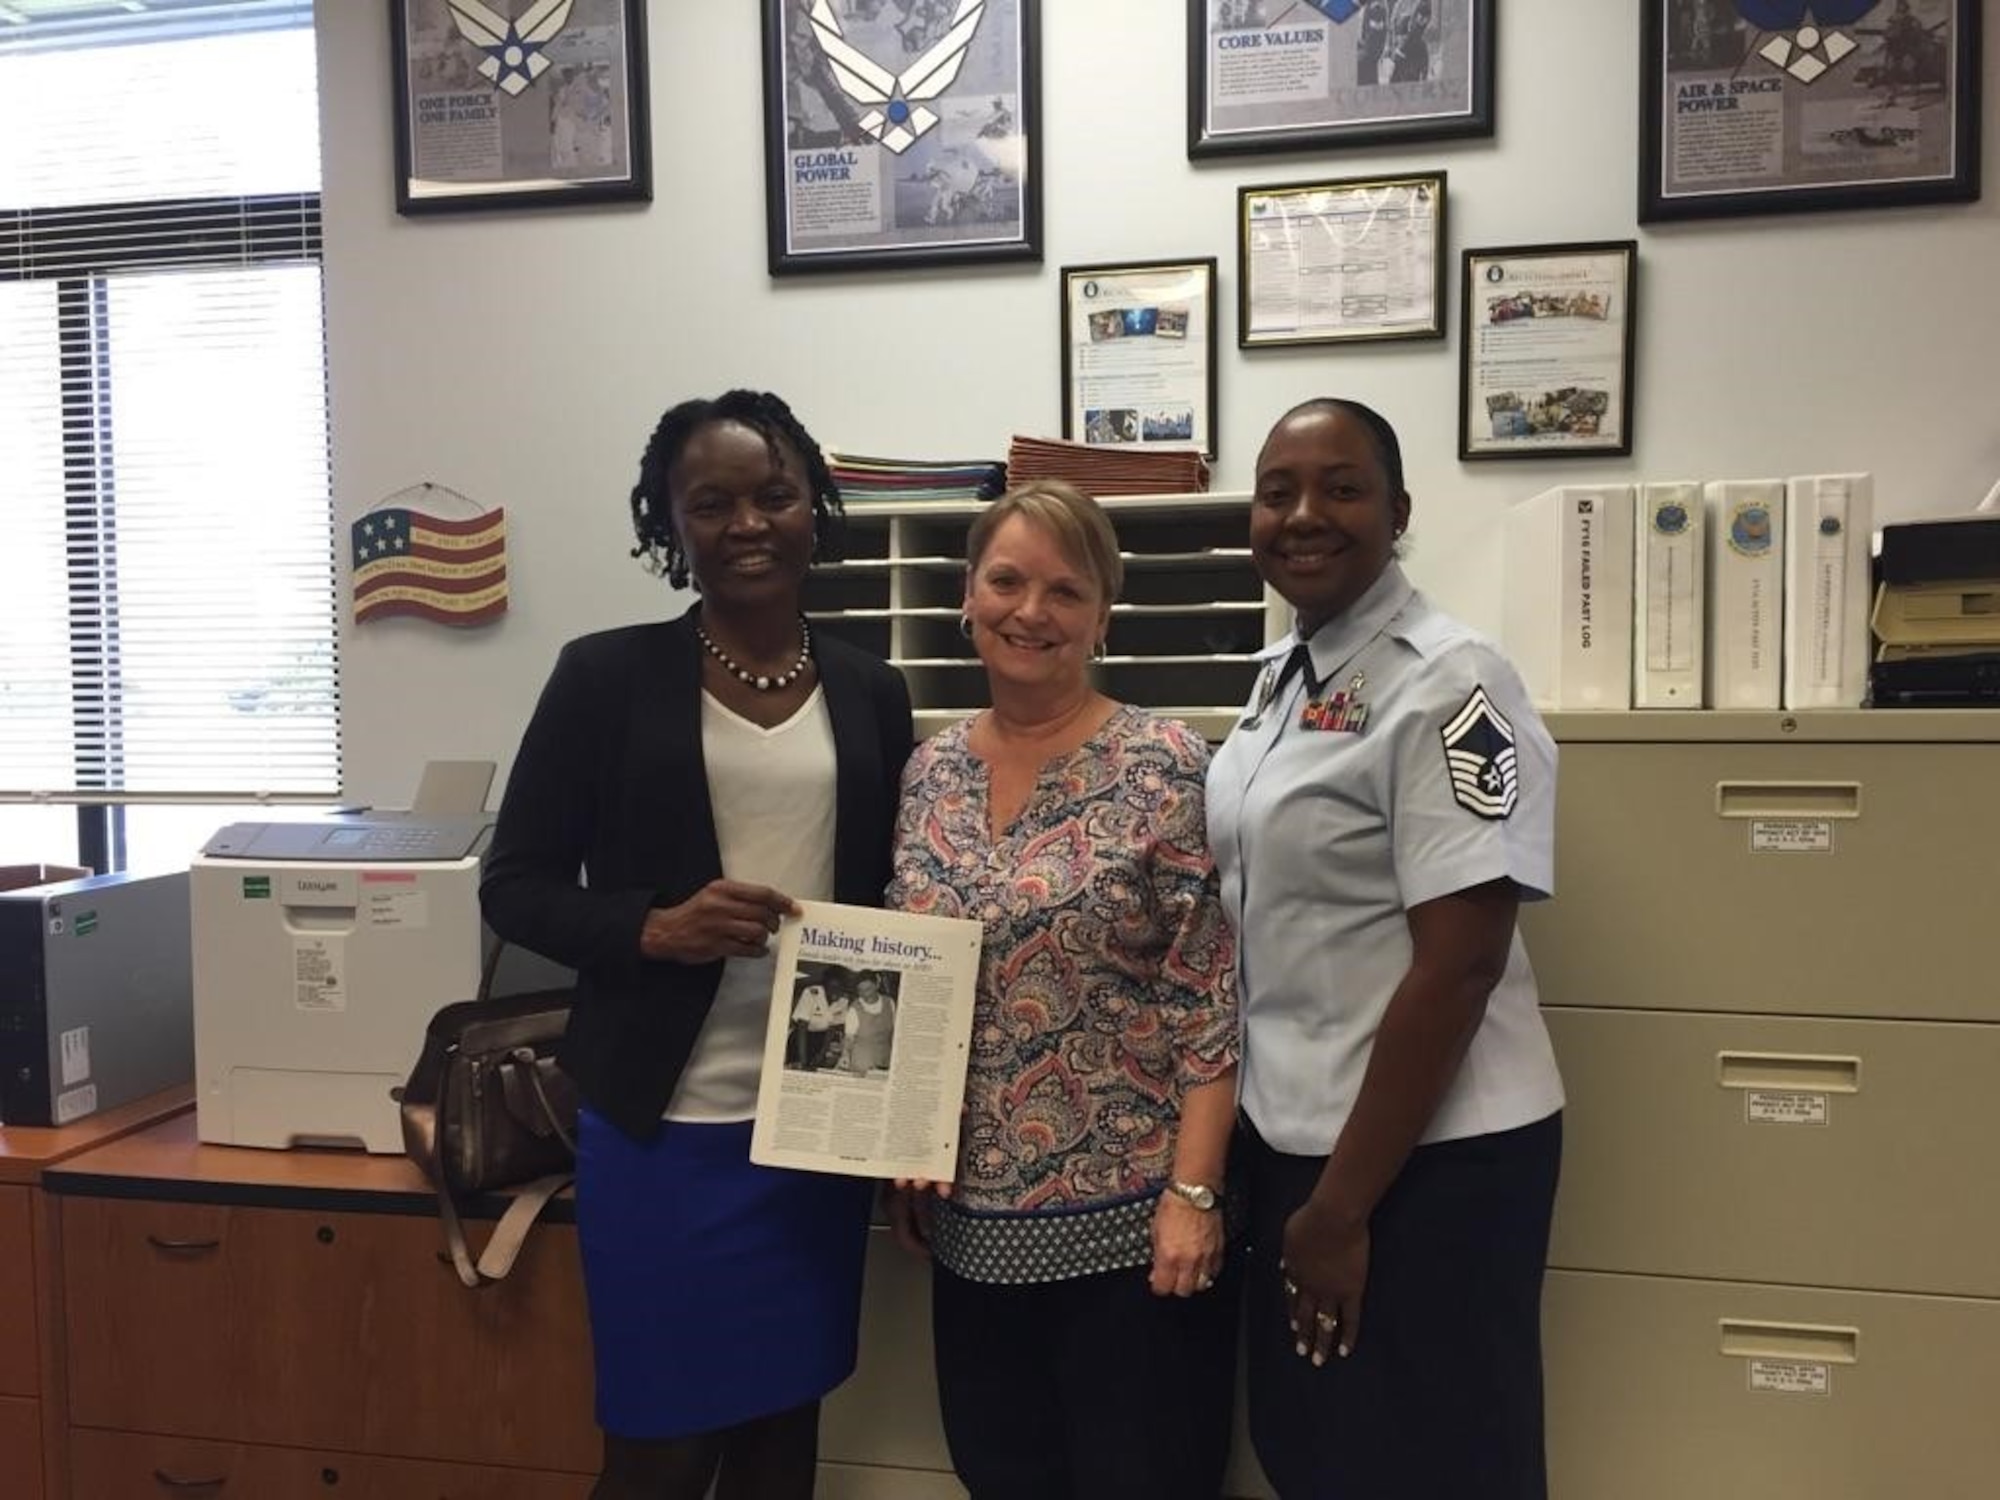 Retired Senior Master Sgt. Terry Cooper, left, poses for a photo with Dorothea Clisby 336th Recruiting Squadron secretary, middle and Senior Master Sgt. Josephine Davis-Fogle, 336th RCS production superintendent, during a visit, March 24, 2016, at Moody Air Force Base, Ga. Cooper was the first female squadron superintendent of the 336th RCS. Twenty years later, Davis-Fogle is the only other female to hold that position and works with the same secretary as her predecessor. (Courtesy Photo)